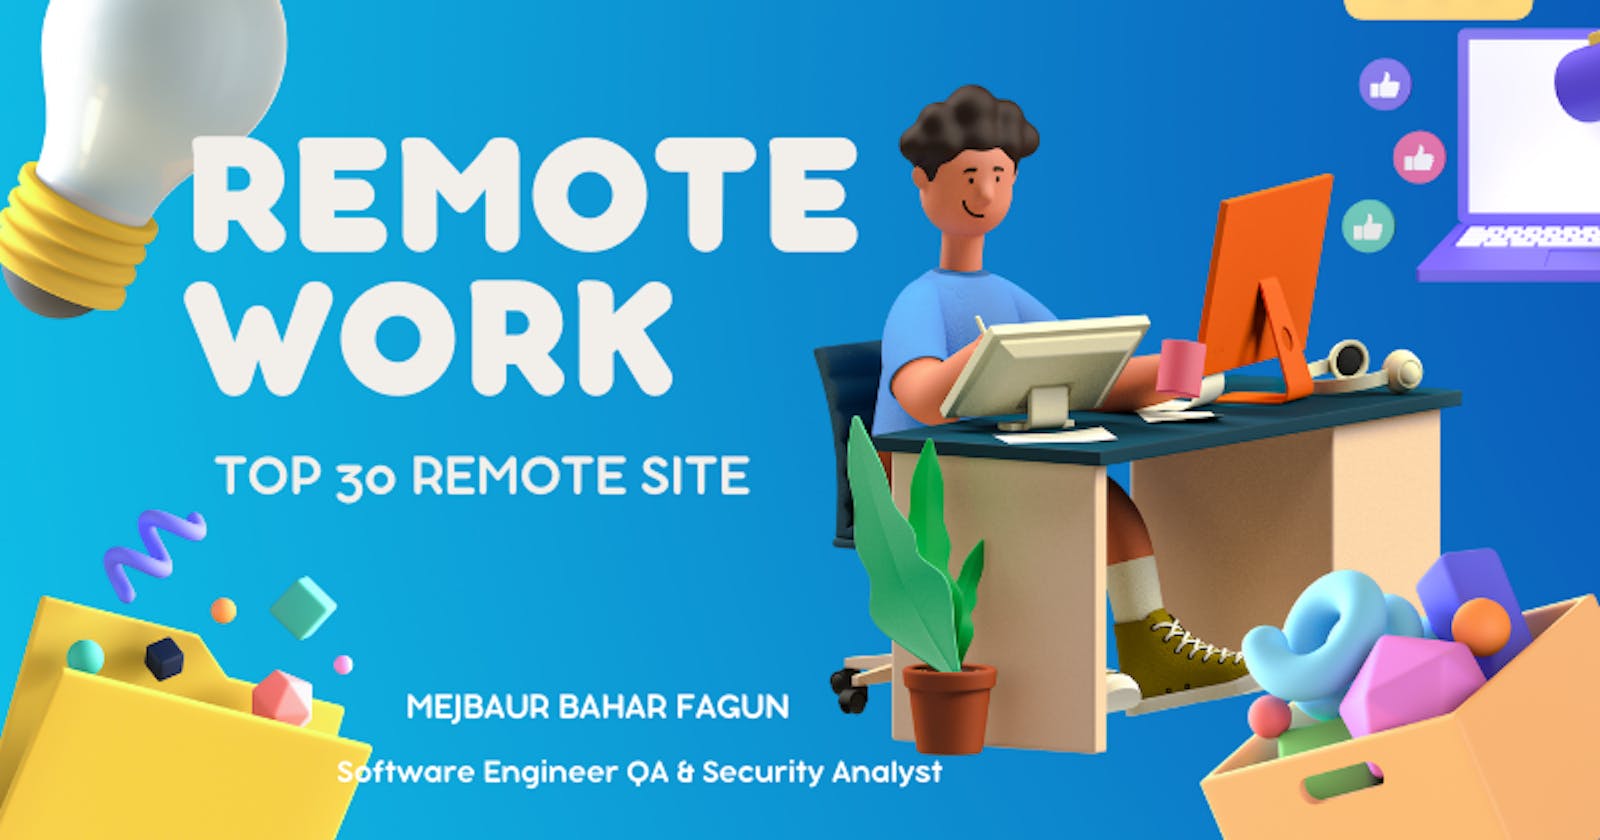 Remote Work and Top 30 Remote Work Job Search Sites